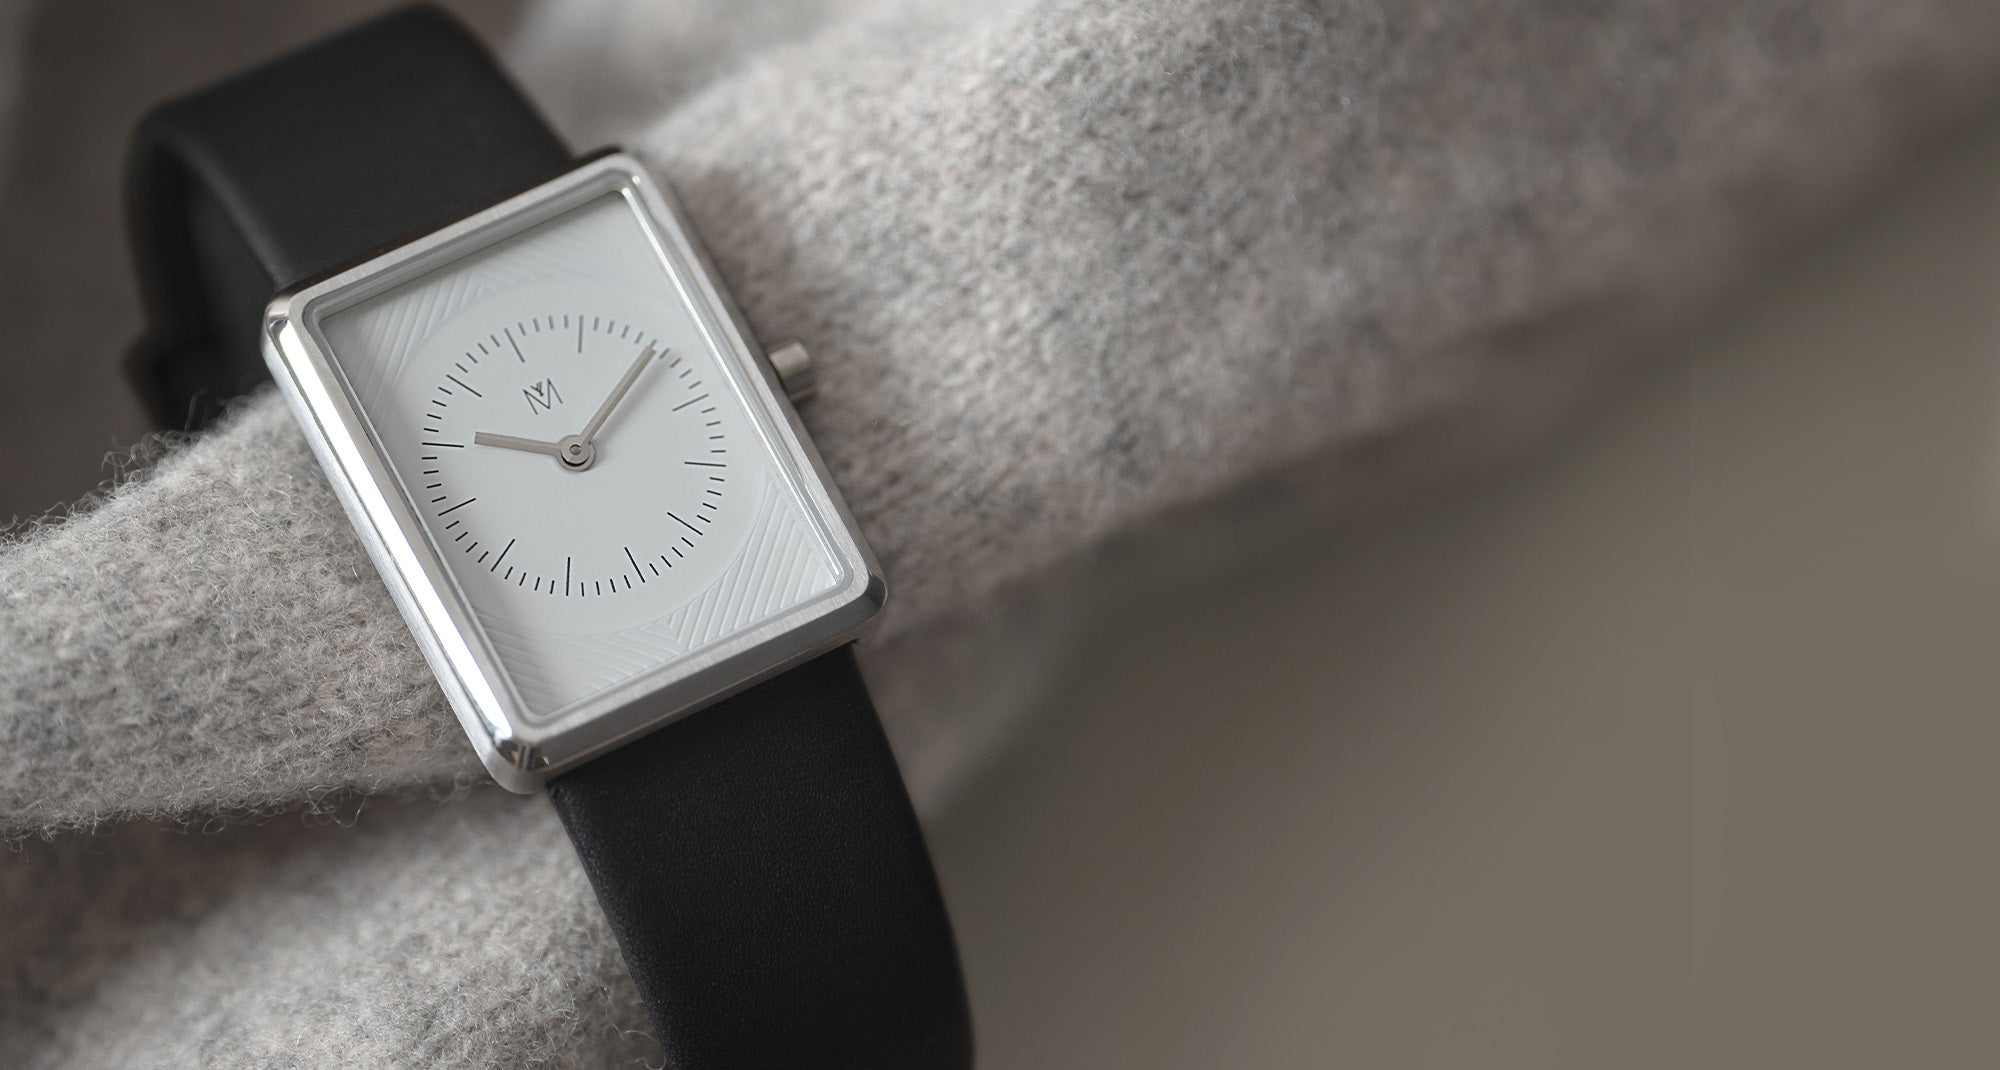 Square Watches For Men and Women